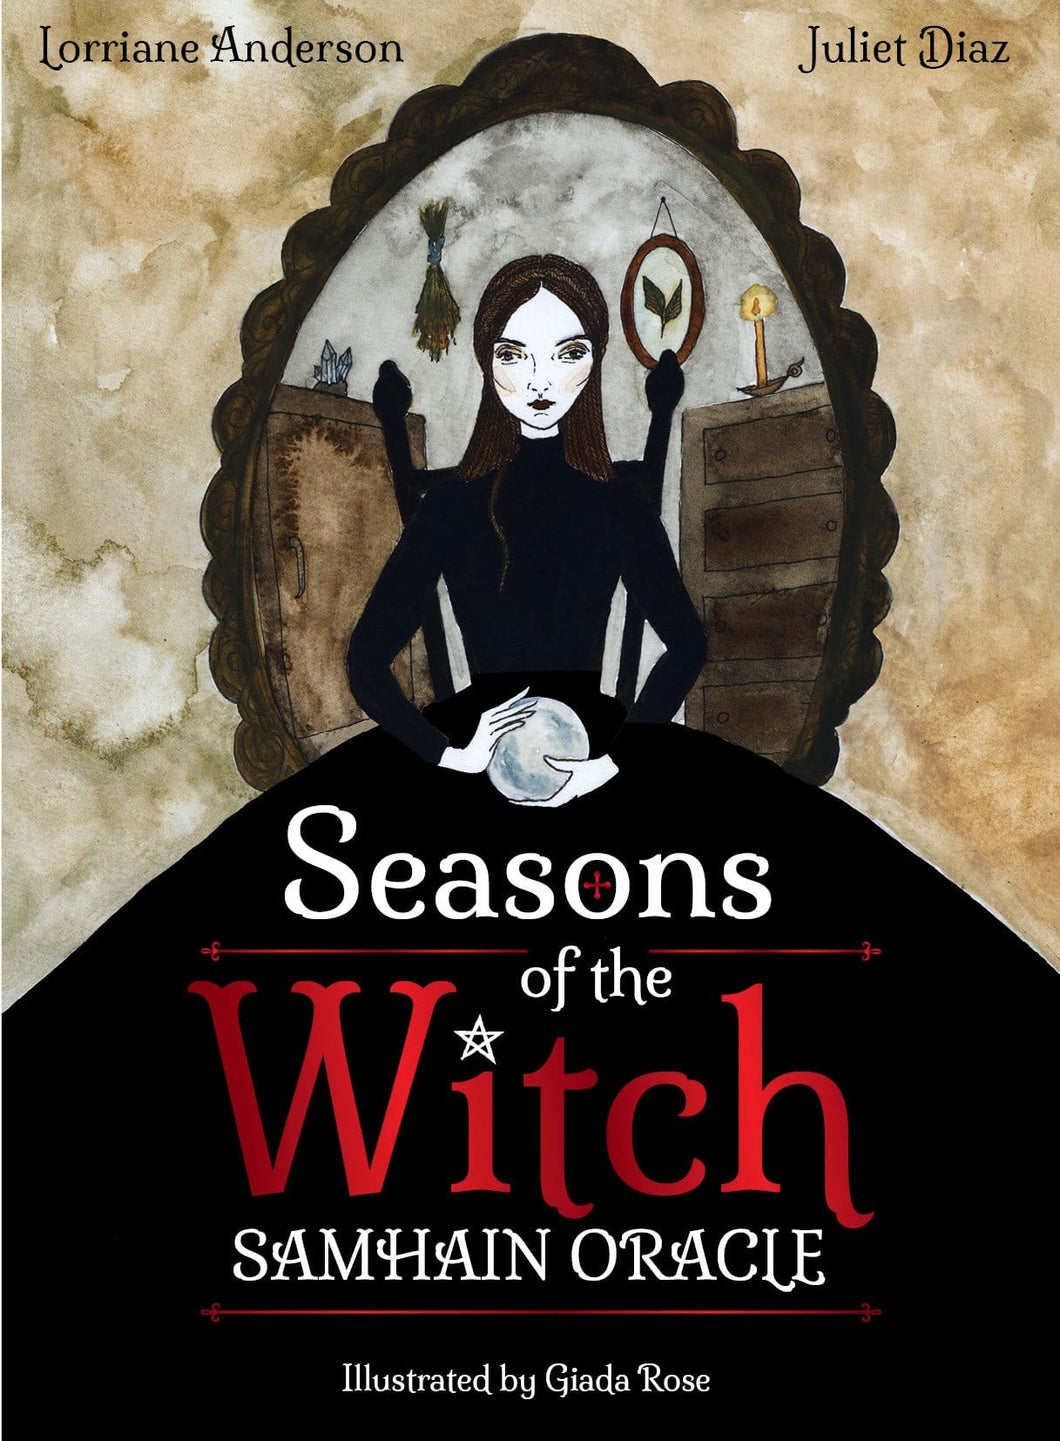 Seasons of the witch - Samhain oracle